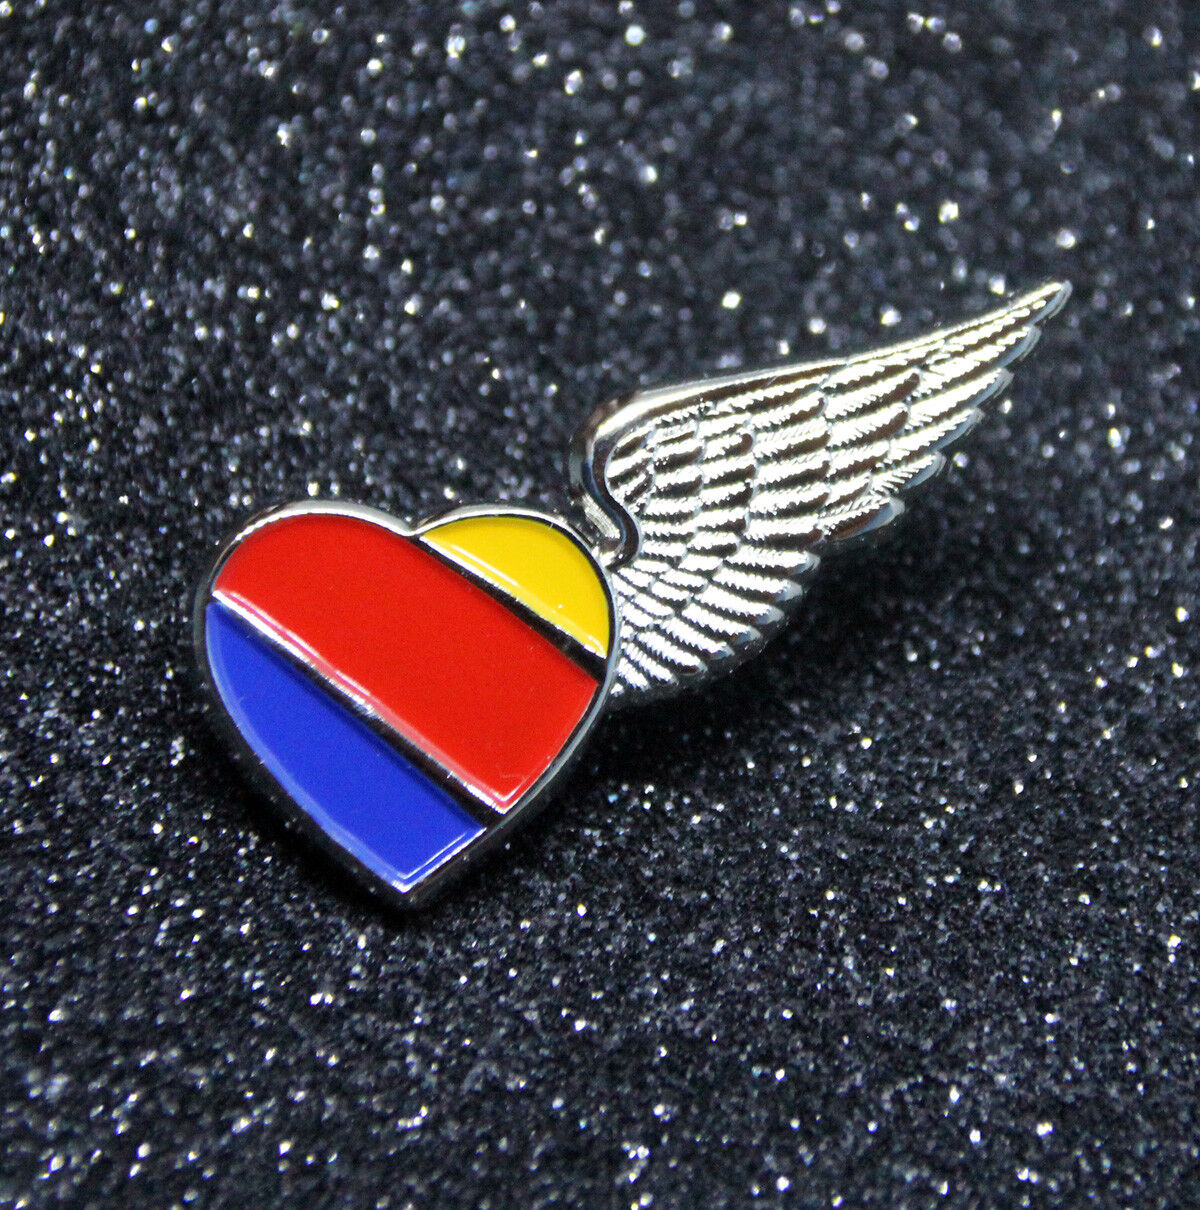 WING Pin SOUTHWEST AIRLINES Heart HALF - WINGS metal for Pilot Airline Crew